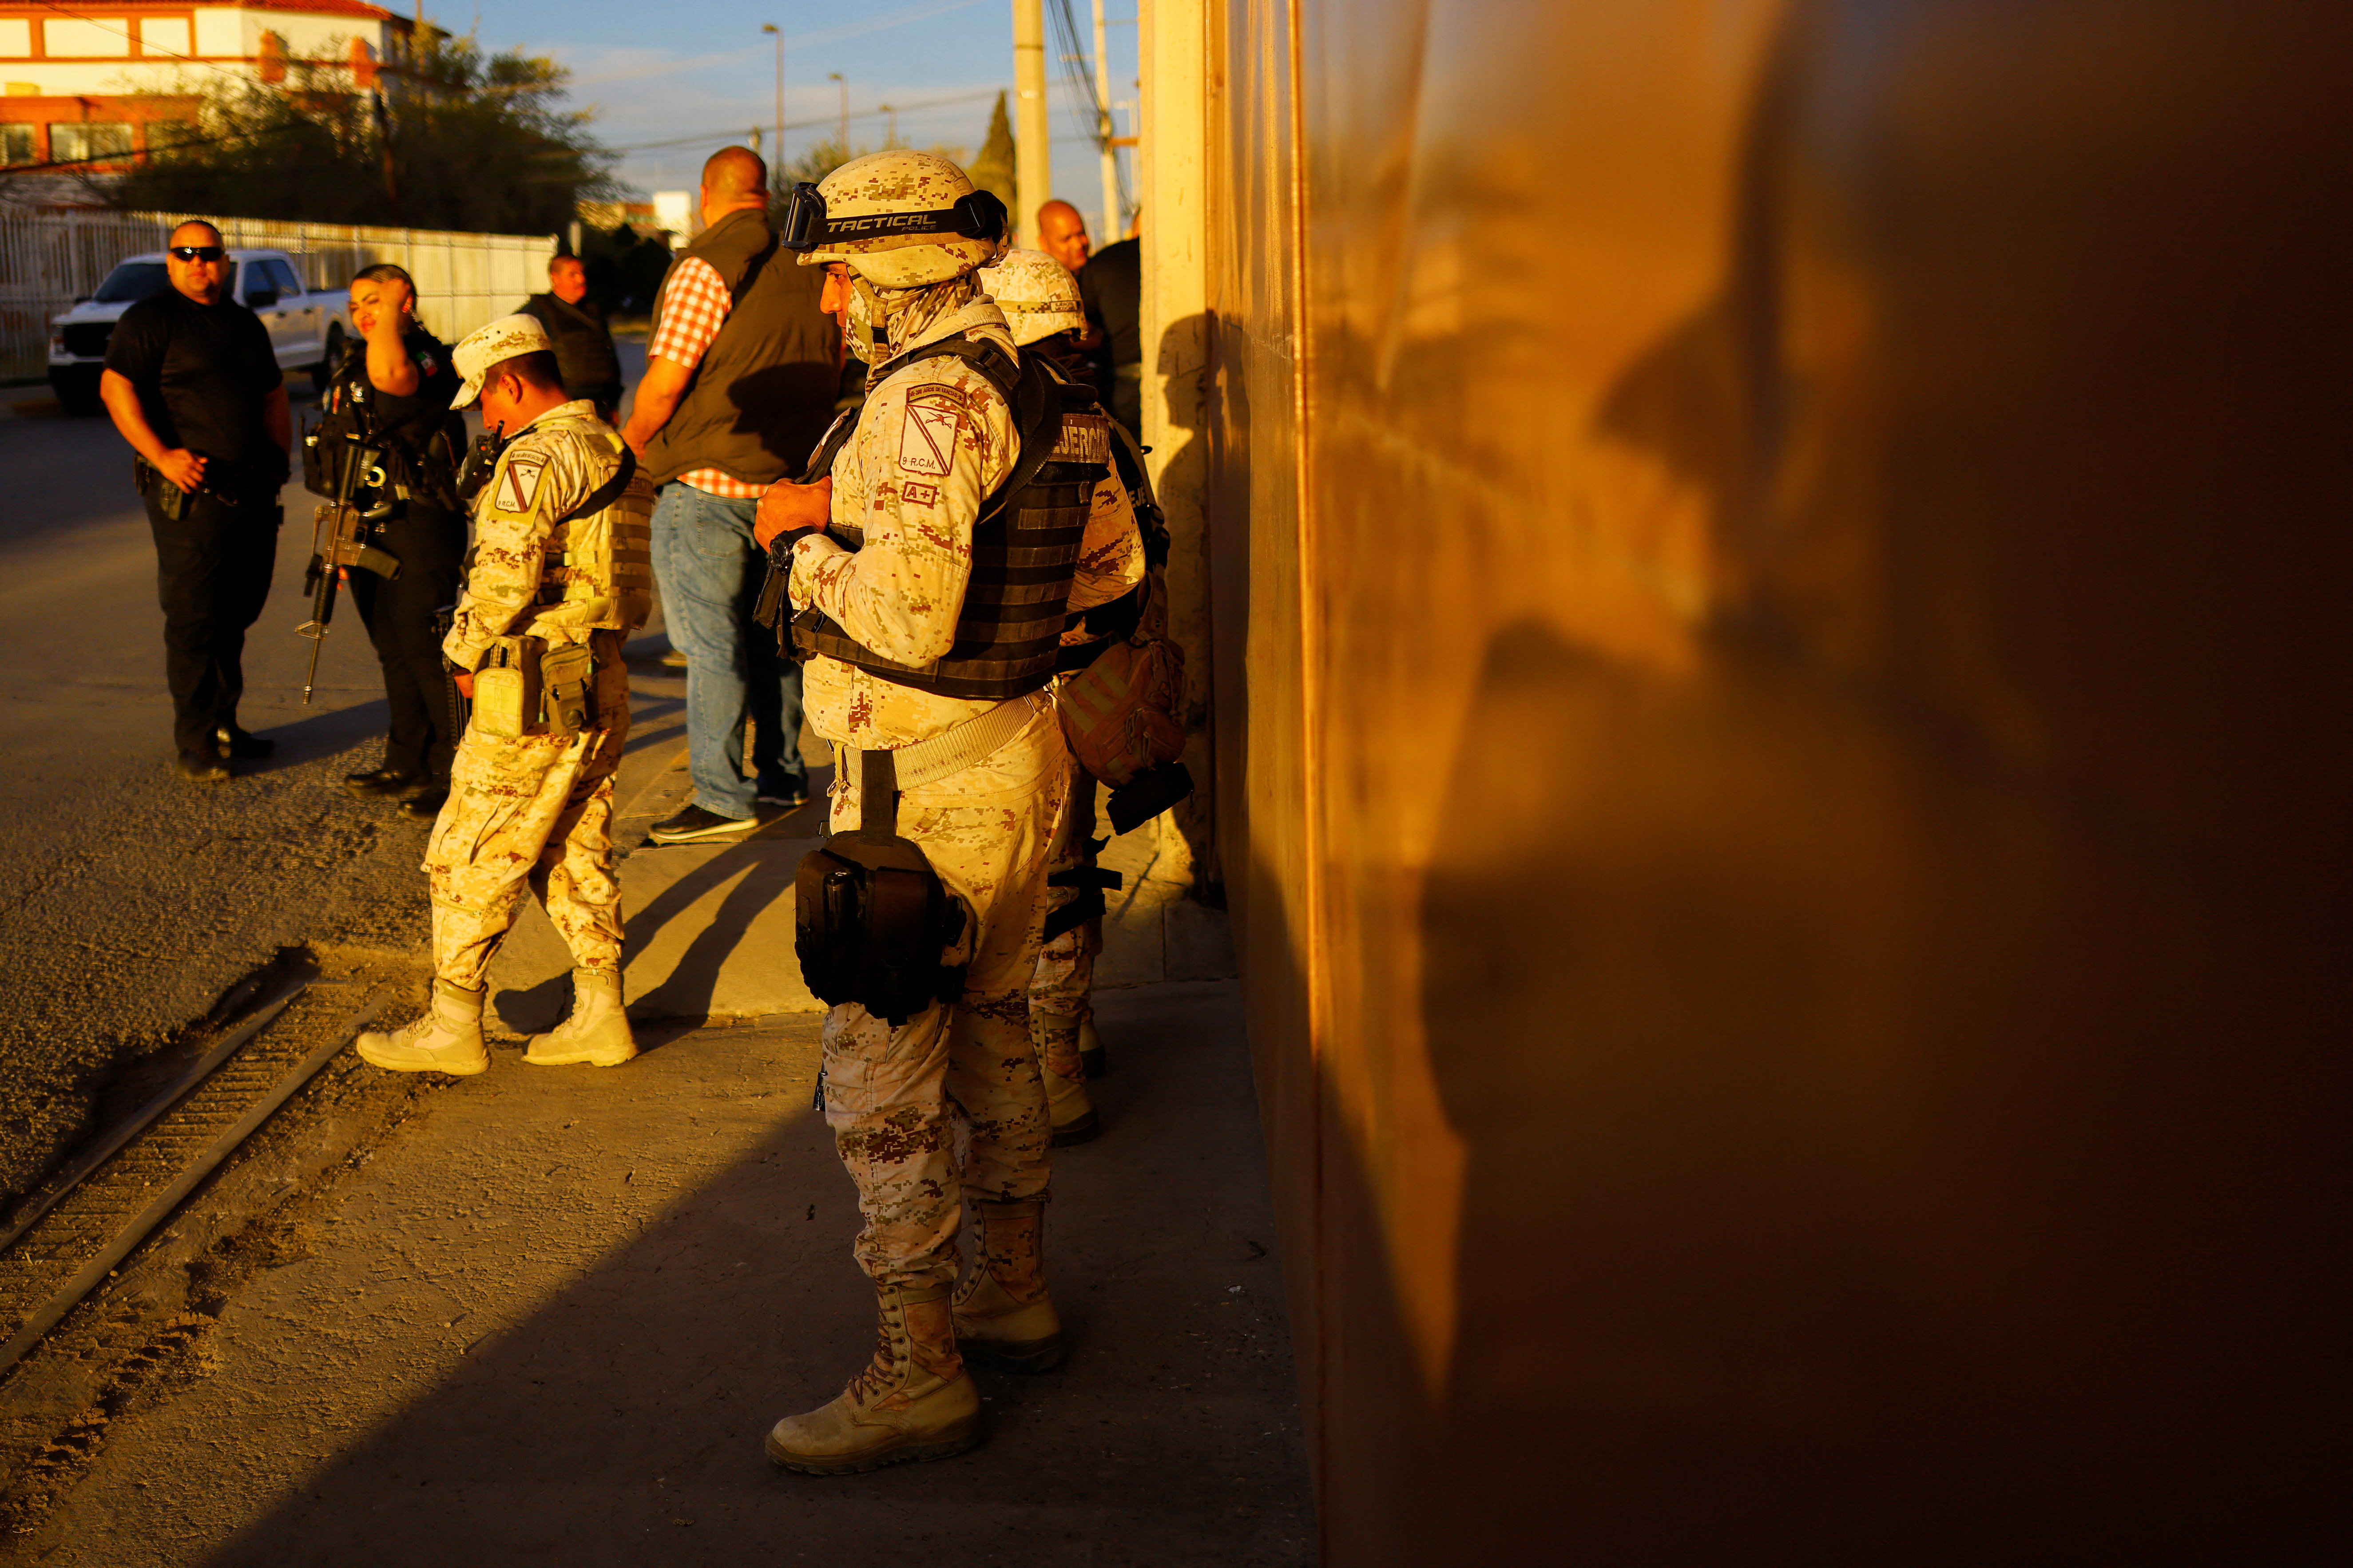 Security forces guard a trailer, in which the drug crystal meth was found according to a statement from Mexican authorities, in Ciudad Juarez